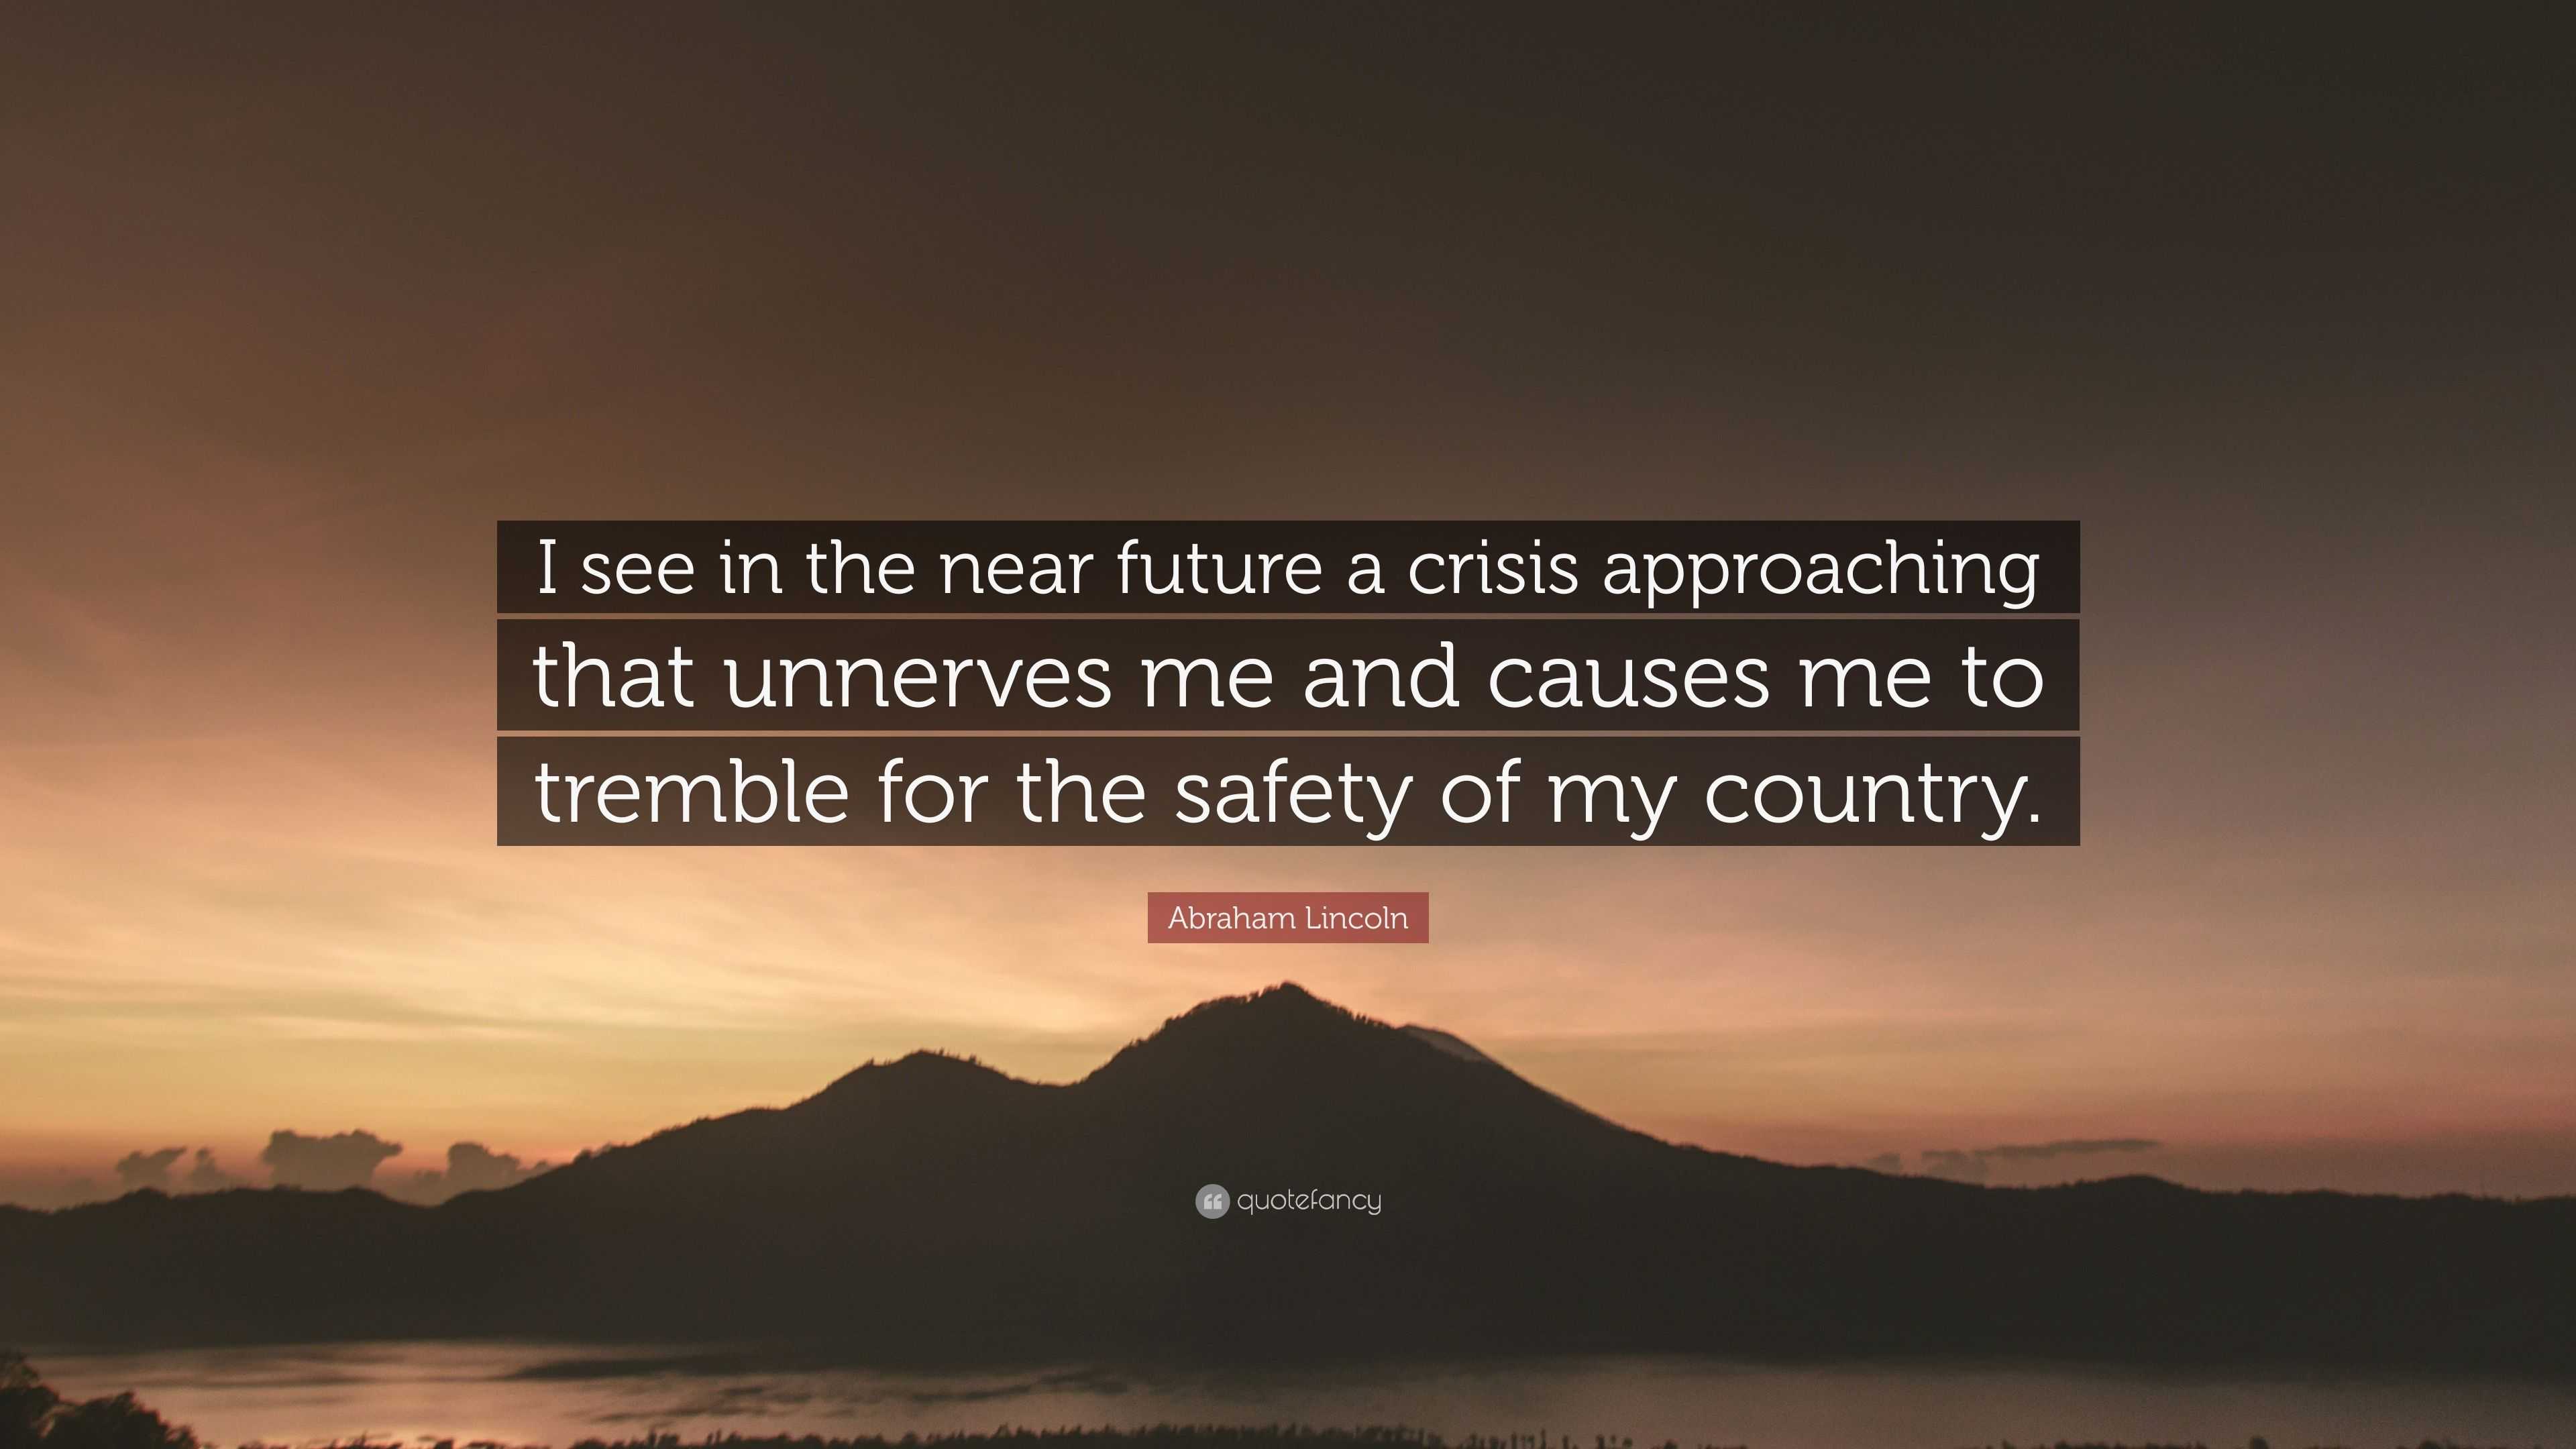 I see in the near future a crisis approaching that unnerves me - IdleHearts